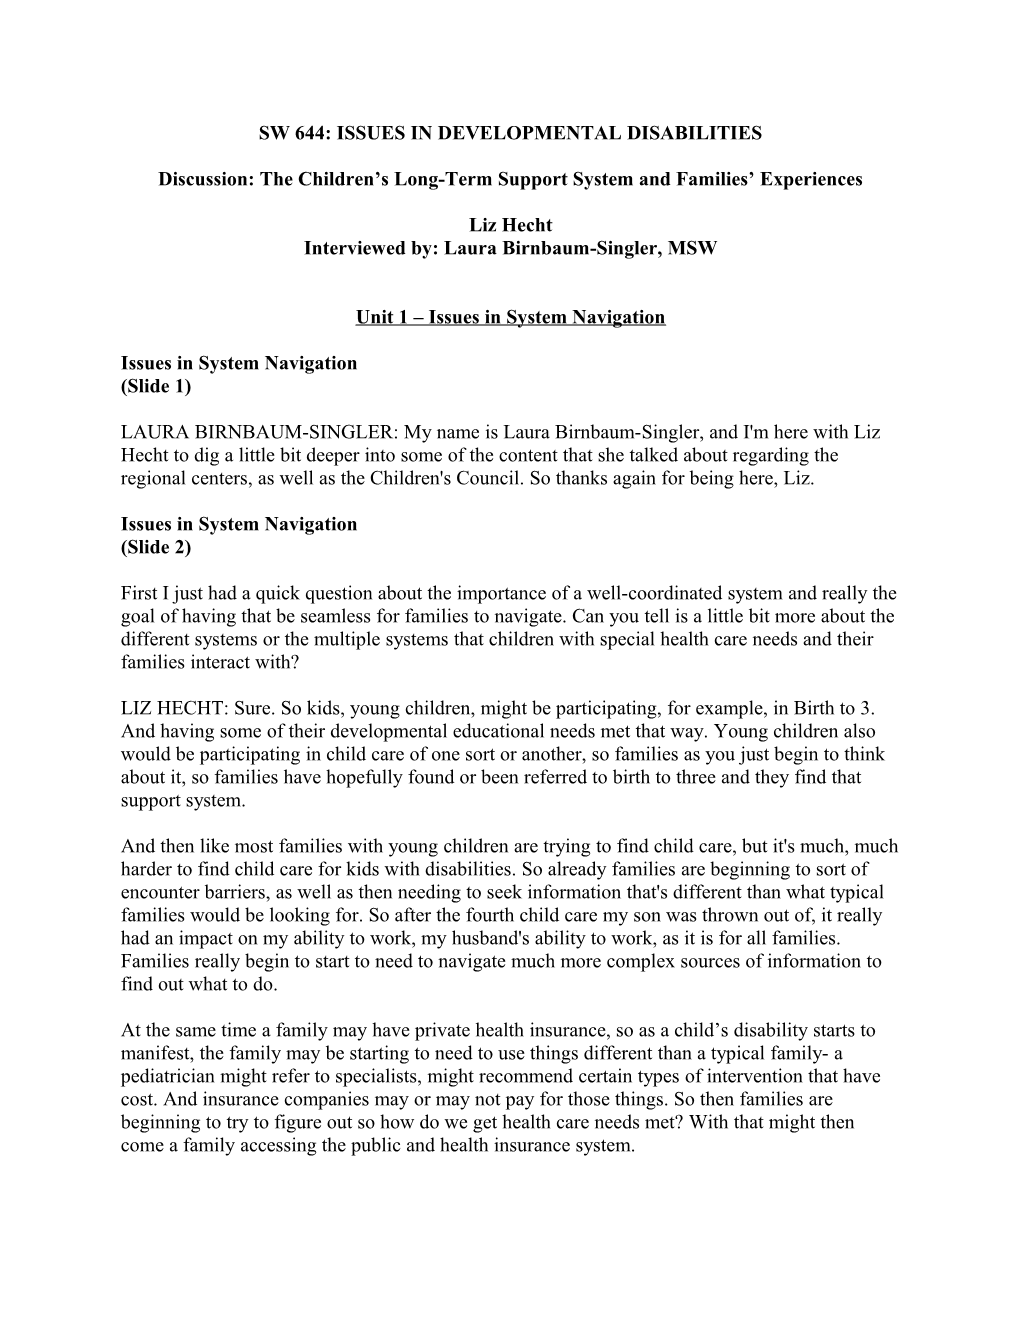 Discussion: the Children S Long-Term Support System and Families Experiences